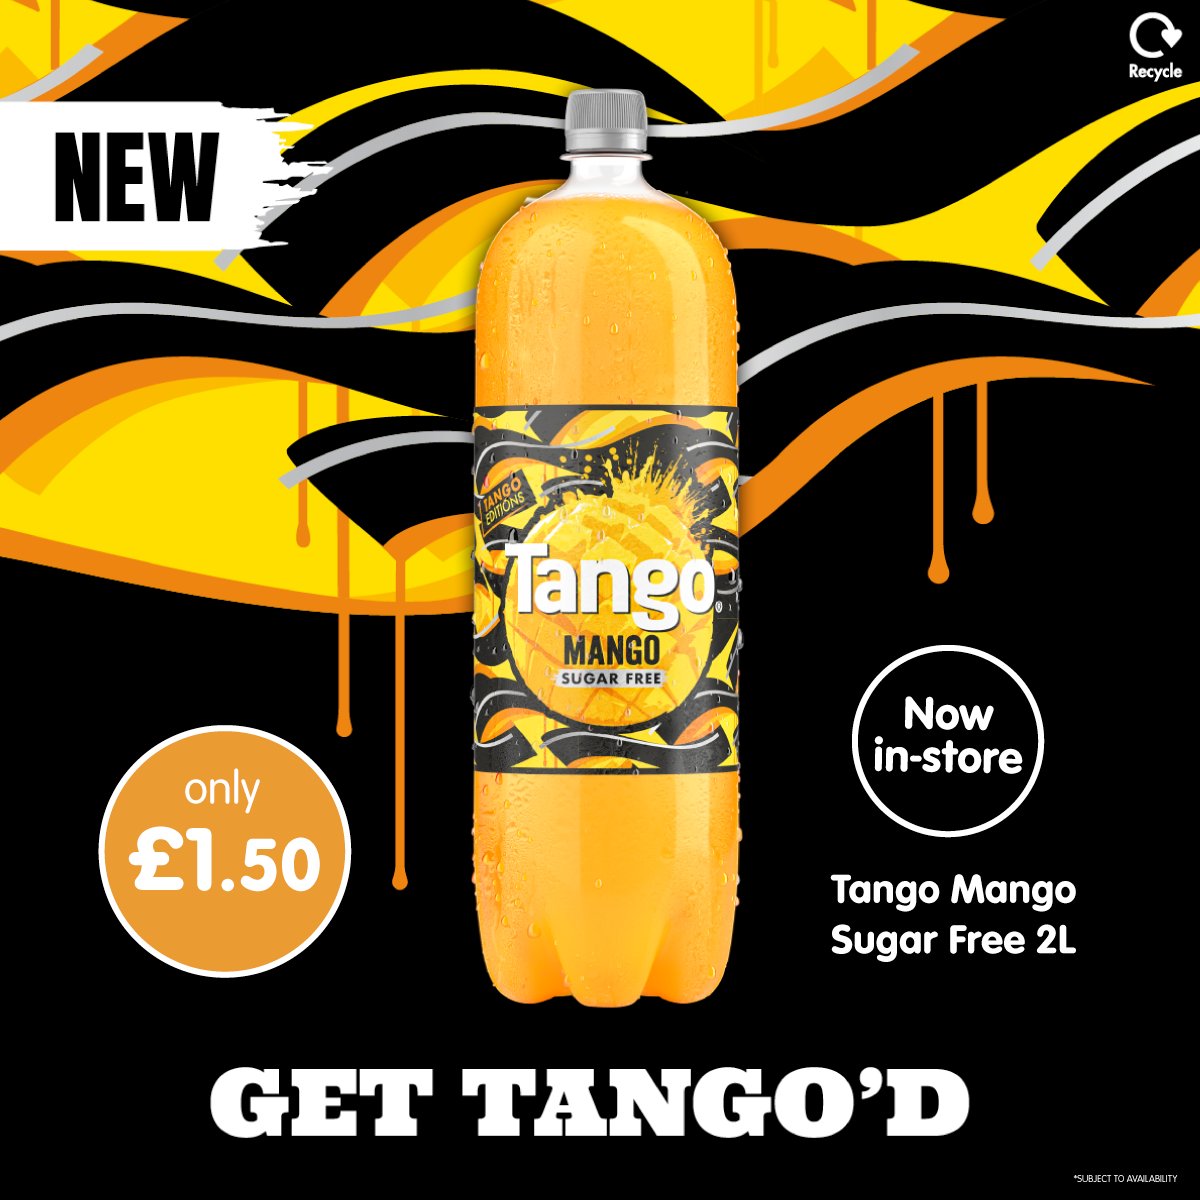 We're always ready for a new flavour - so we'll definitely be popping this Tango Mango into our basket🤤! We love Tango, so a mango variety is much needed🥭! Who fancies giving this a try?!